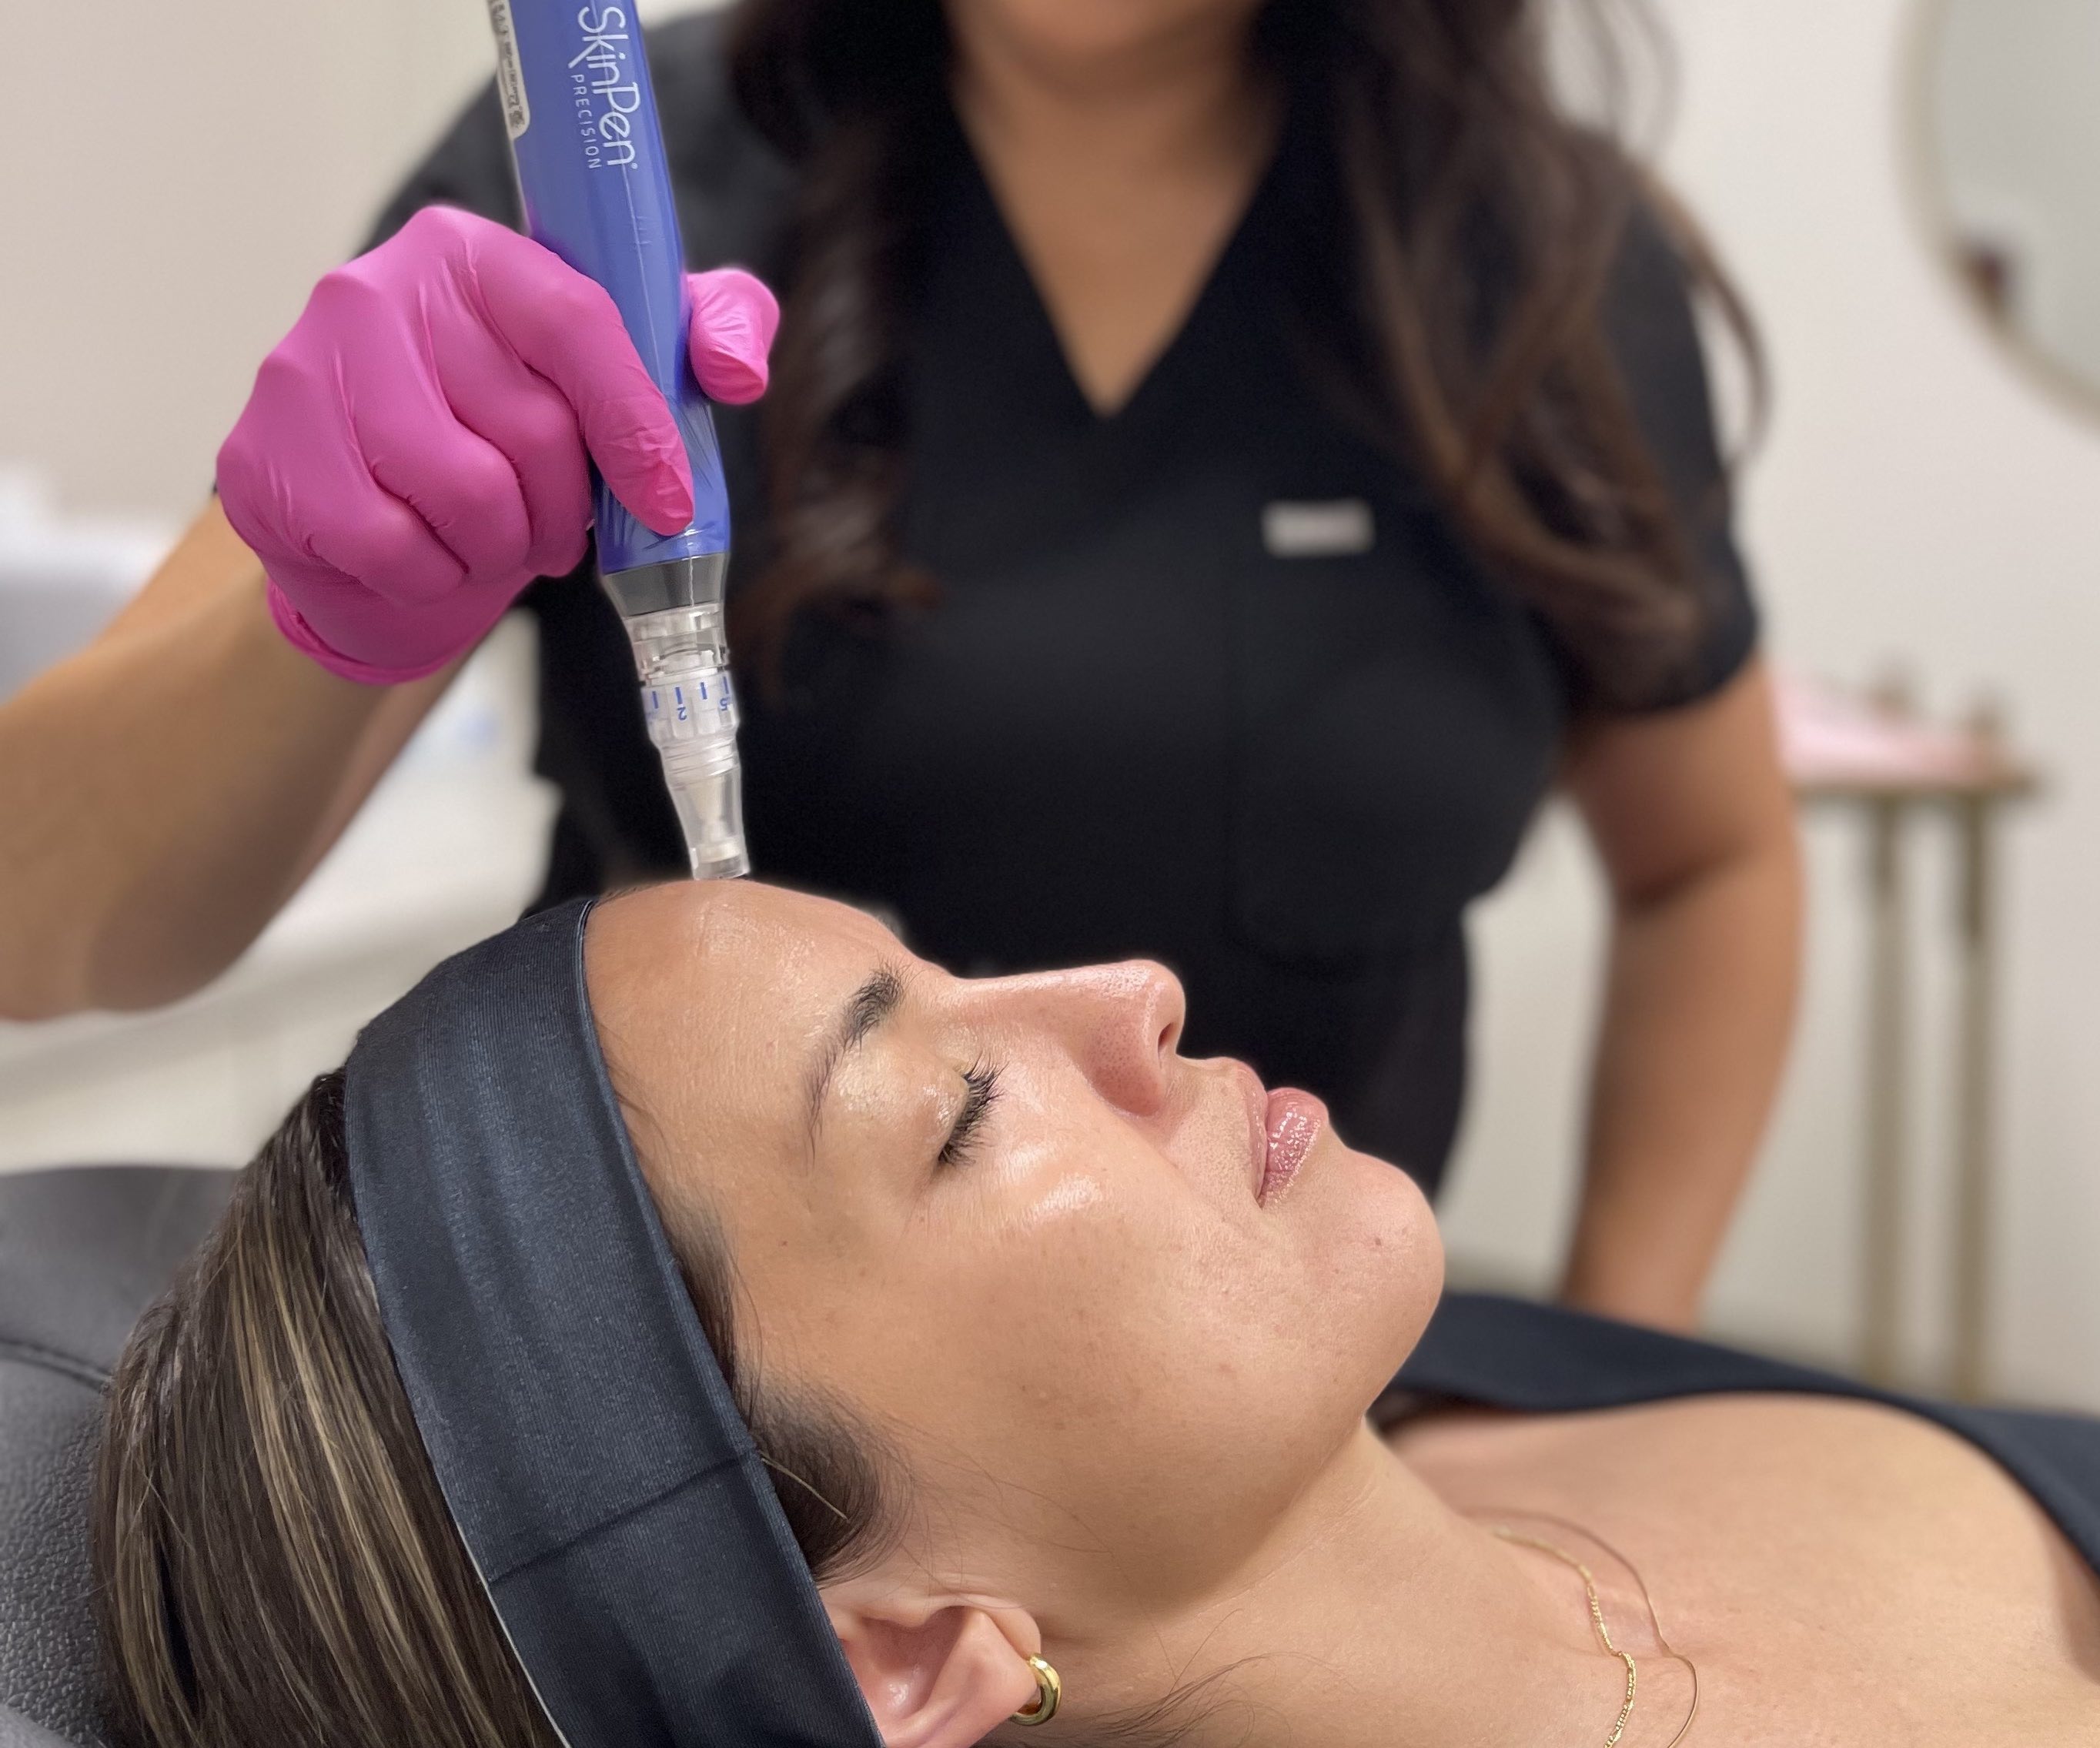 Model receiving microneedling treatment from Erica Bedsted at Refyned Aesthetics Medical Spa in Fresno